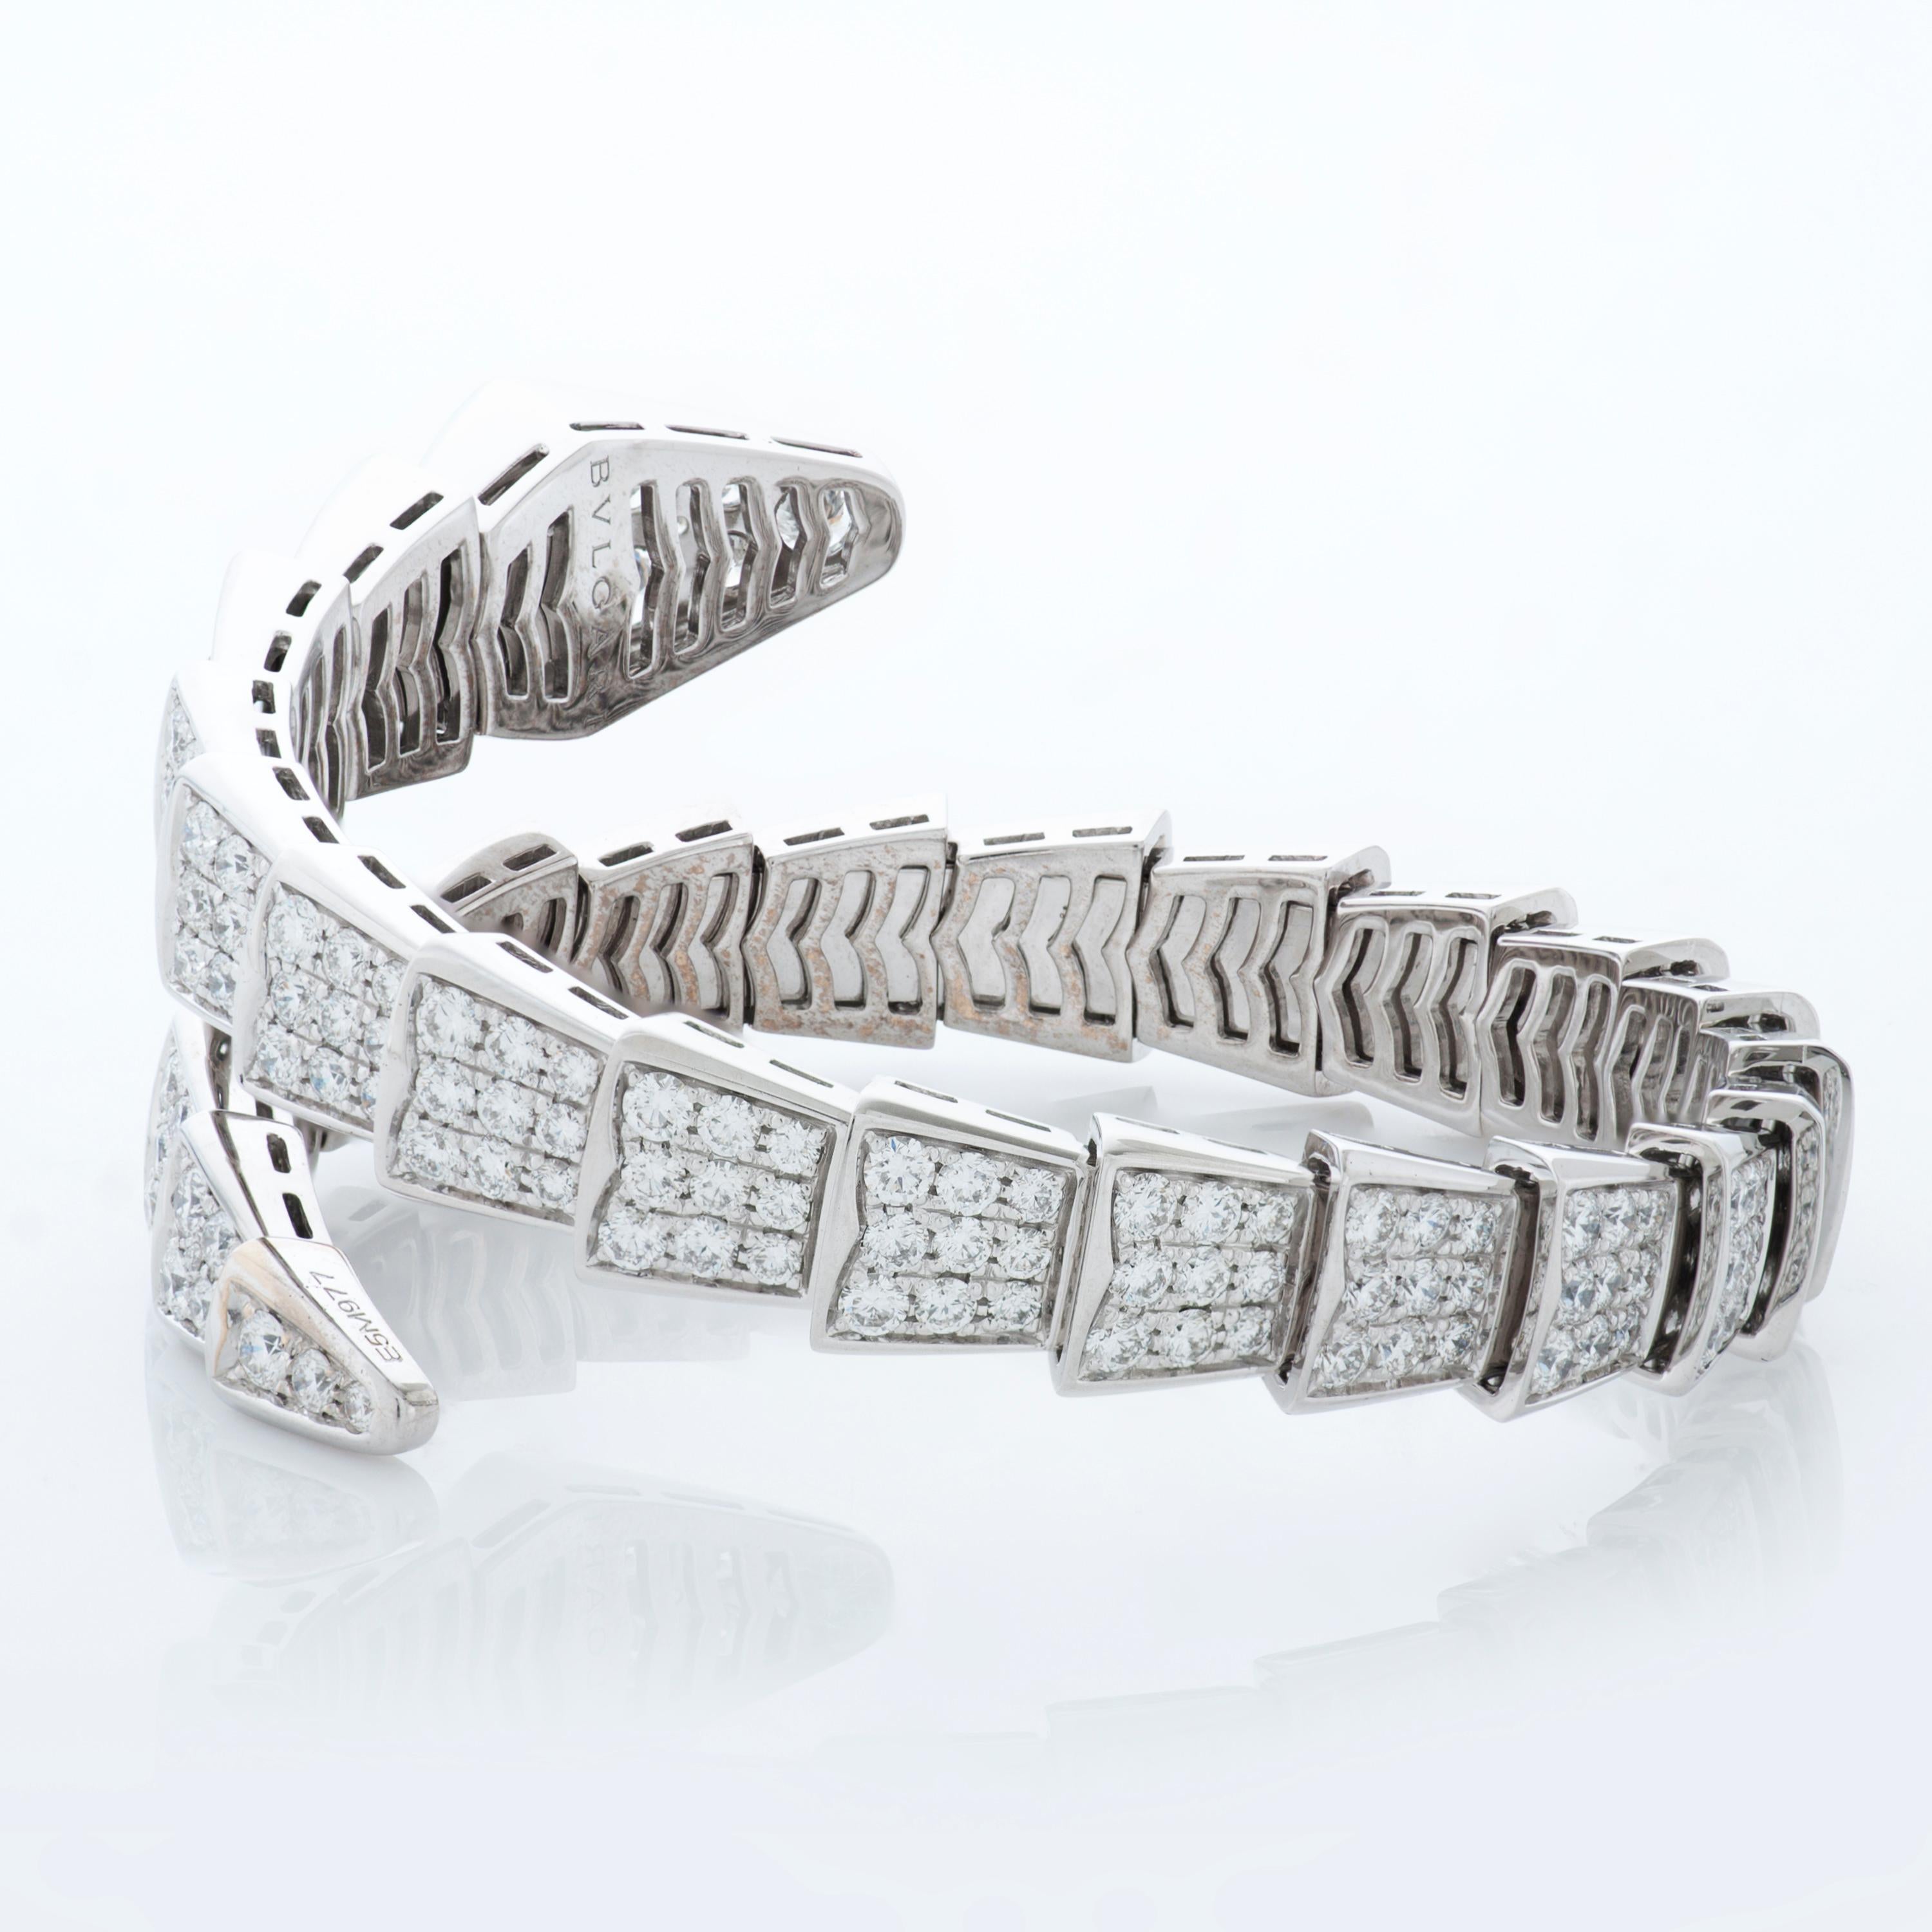 Bulgari single coil Serpenti Viper bracelet in 18k white gold accompanied by a Bulgari certificate of authenticity. 

This Bulgari snake bangle features approximately 8.91 carats of round brilliant cut diamonds pave set over the length of the